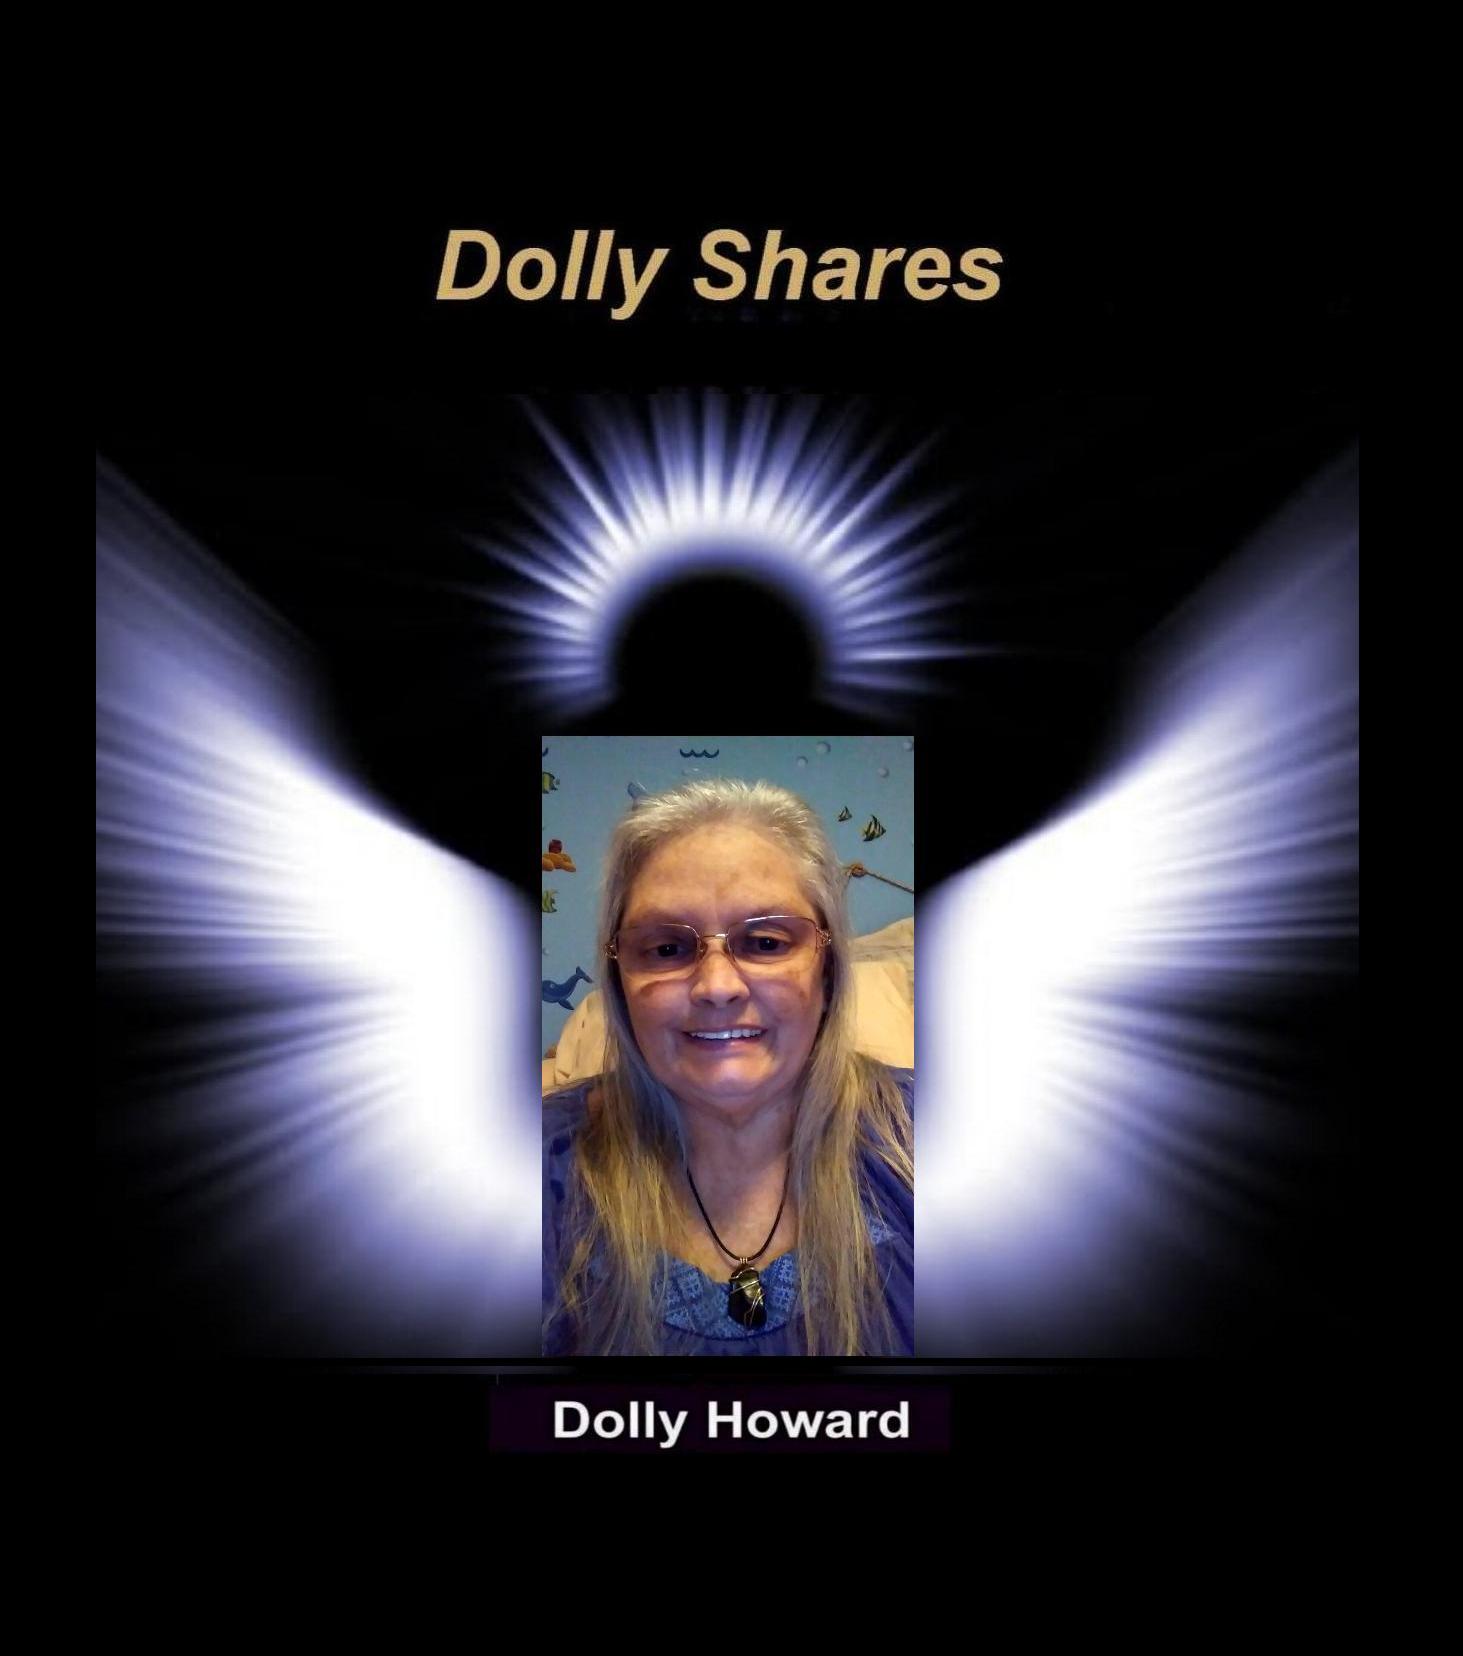 DOLLY SHARES - Dolly Howard on Sick Loved Ones 18-03-20